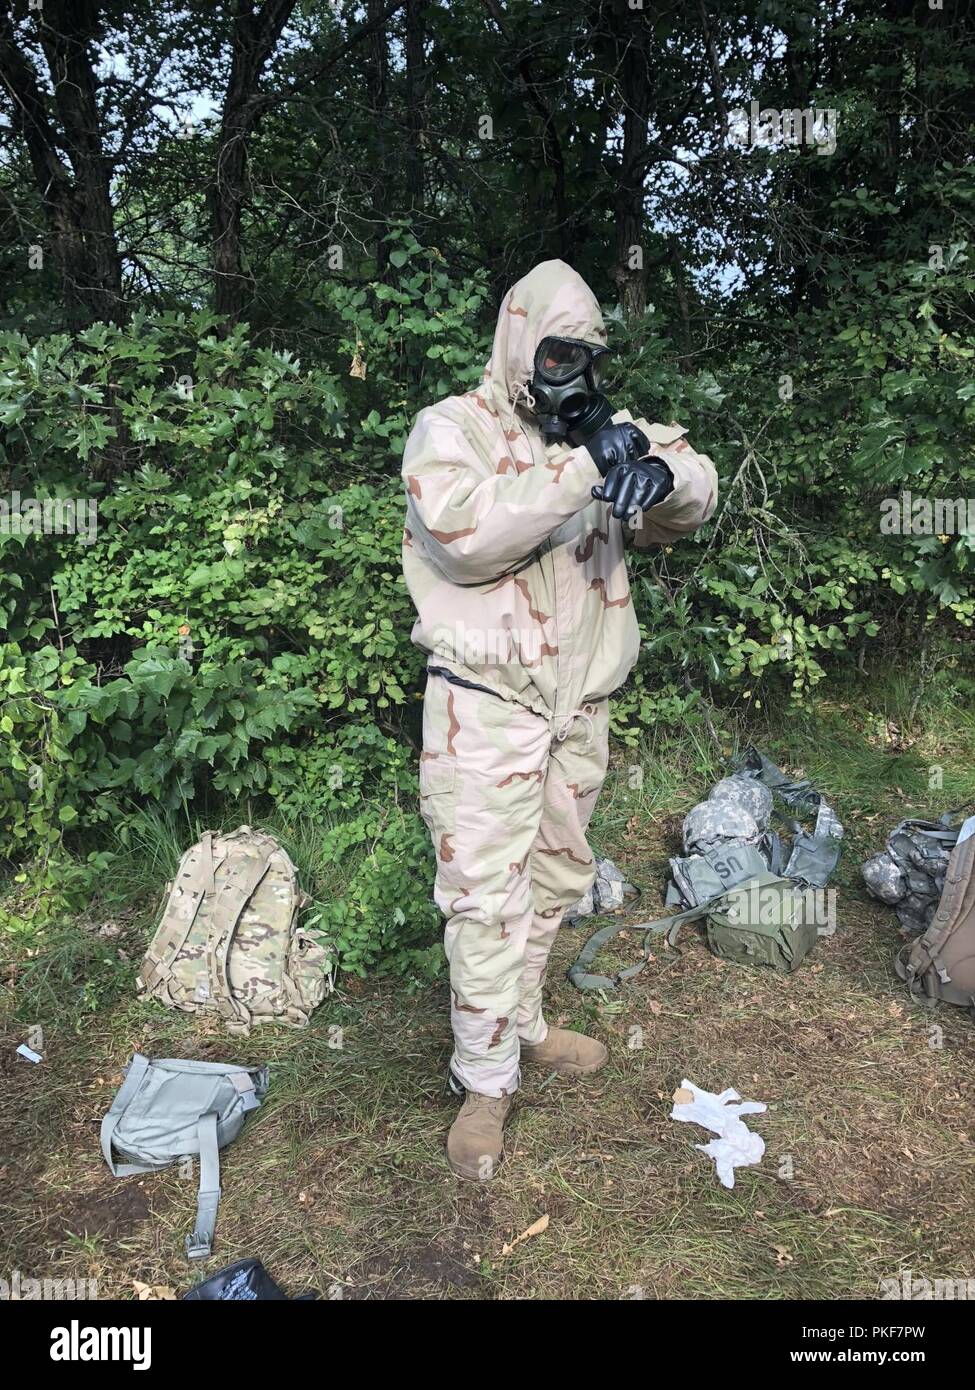 Chaplin Candidate Ramsey of the 382nd Combat Sustainment Support Battalion, based at Joint Base Lewis–McChord, WA., practices dawning his MOPP gear during Lethal Warrior training at Ft. McCoy, WI., during CSTX 86-18-02, August 8, 2018. Ramsey joined the reserves to do his part to reduce suicides amongst service members. CSTX 86-18-02 is a Combat Support Training Exercise that ensures America's Army Reserve units and Soldiers are trained and ready to deploy on short-notice and bring capable, combat-ready, and lethal firepower in support of the Army and our joint partners anywhere in the world. Stock Photo